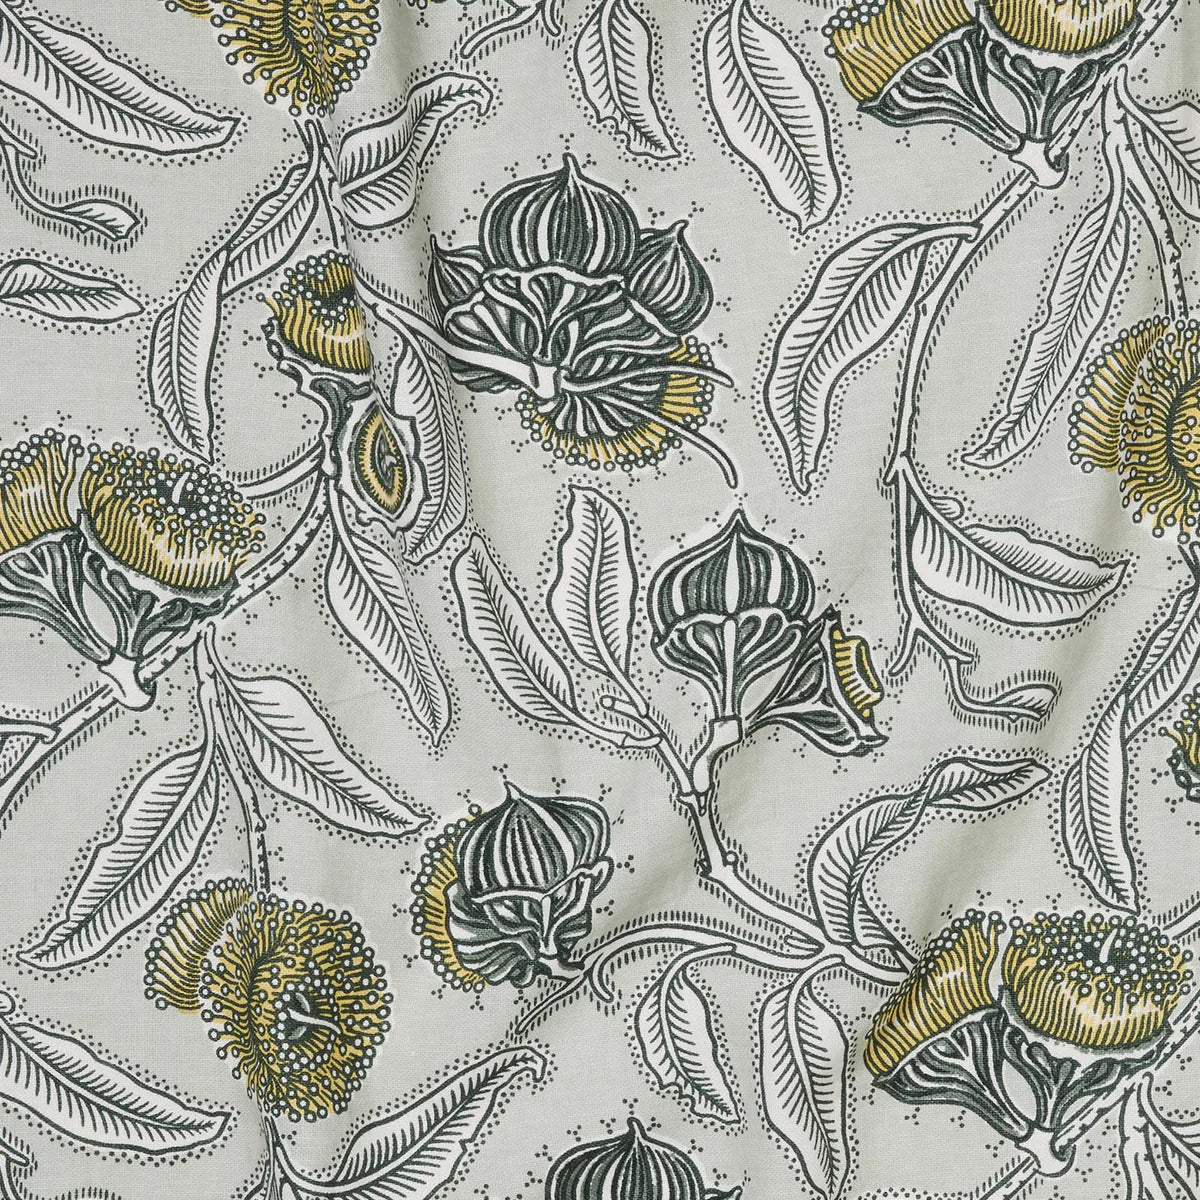 Draped fabric in a painterly floral print in gray, white and yellow on a light gray field.